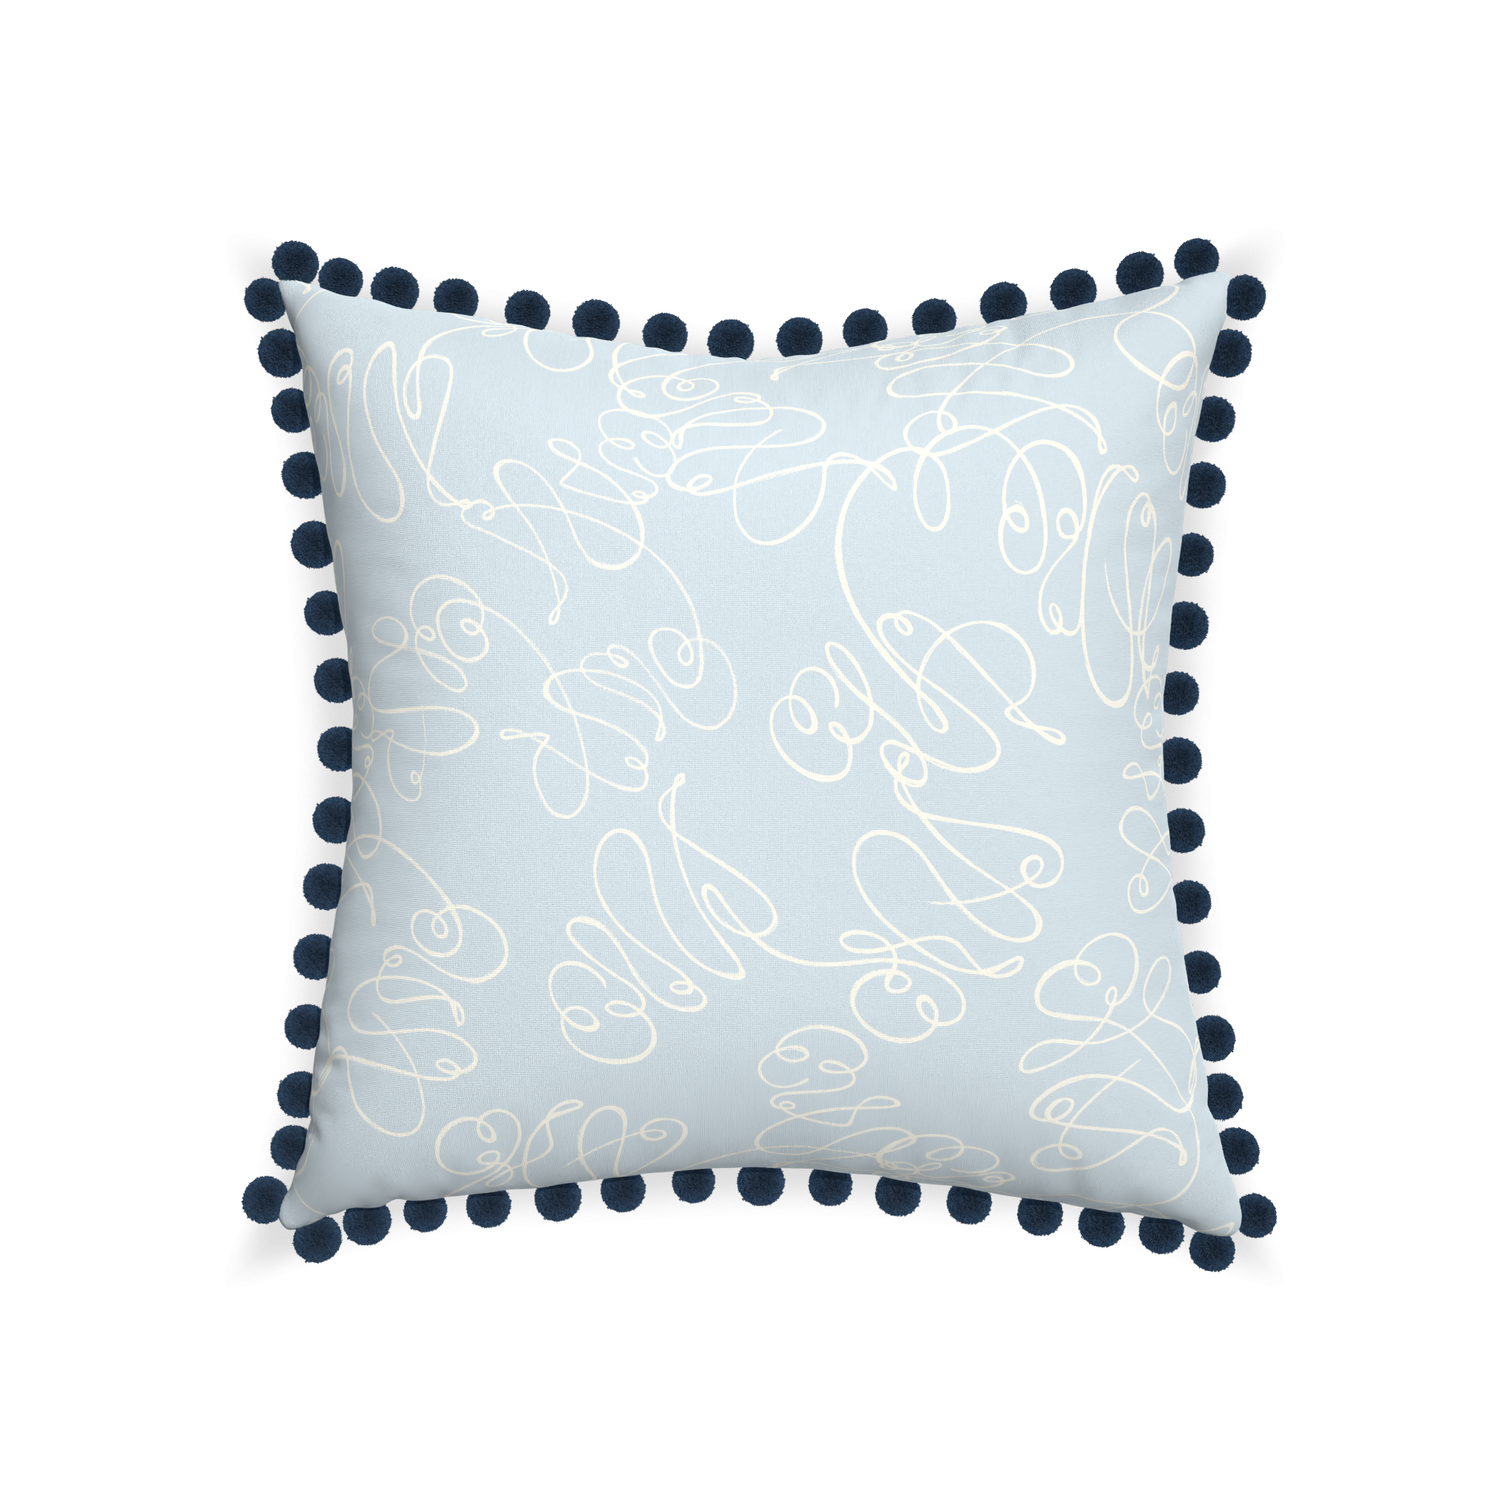 22-square mirabella custom powder blue abstractpillow with c on white background